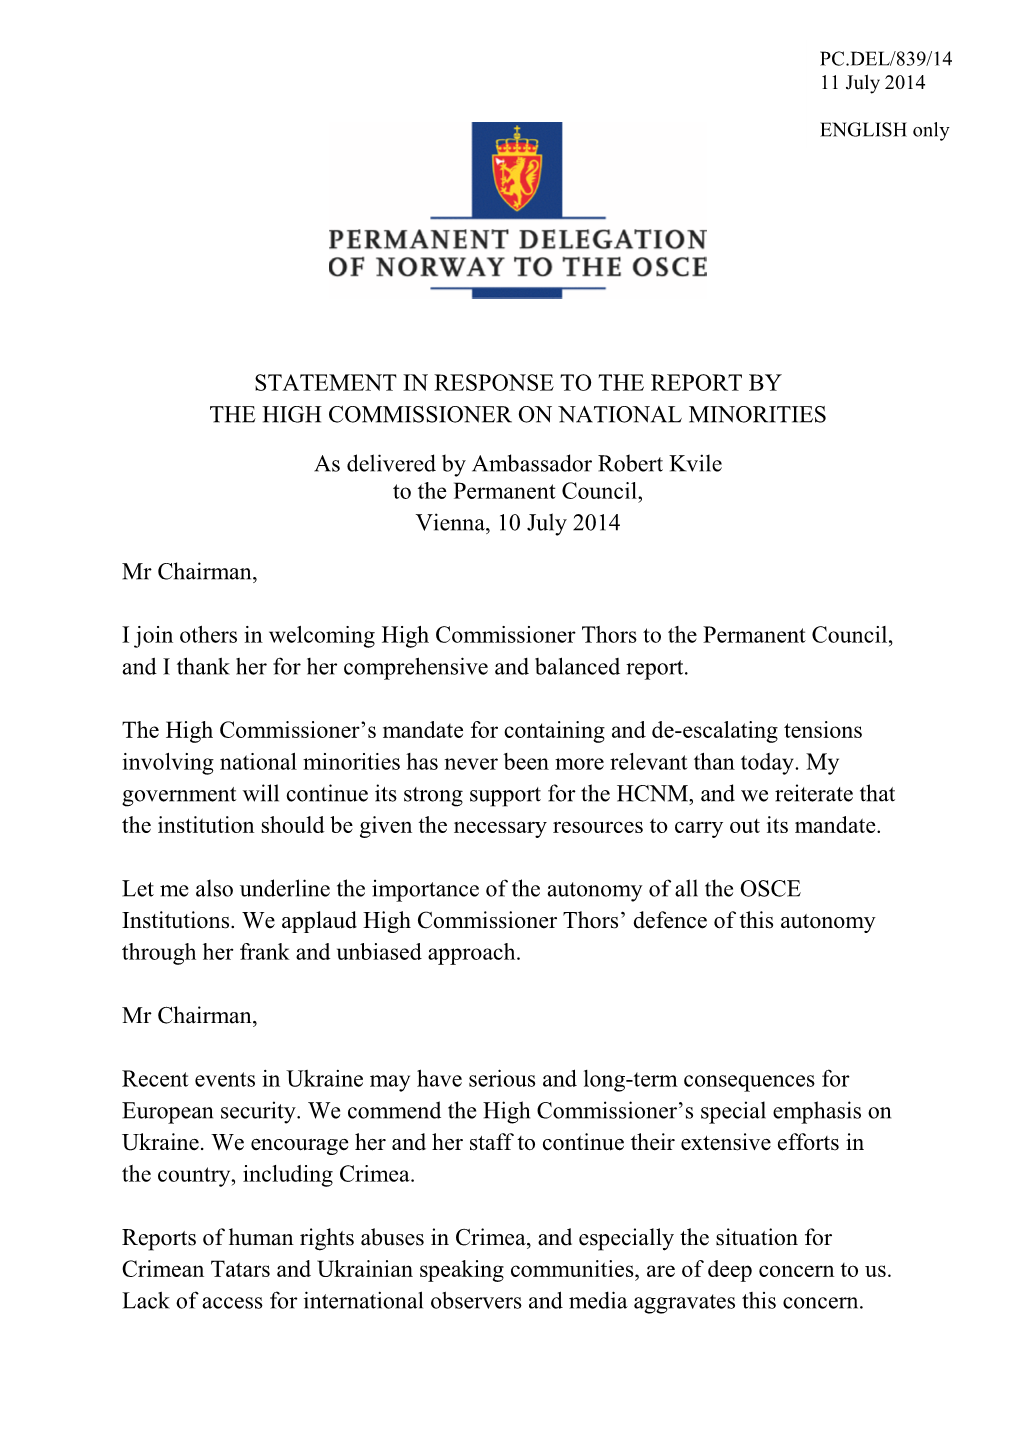 Statement in Response to the Report by the High Commissioner on National Minorities